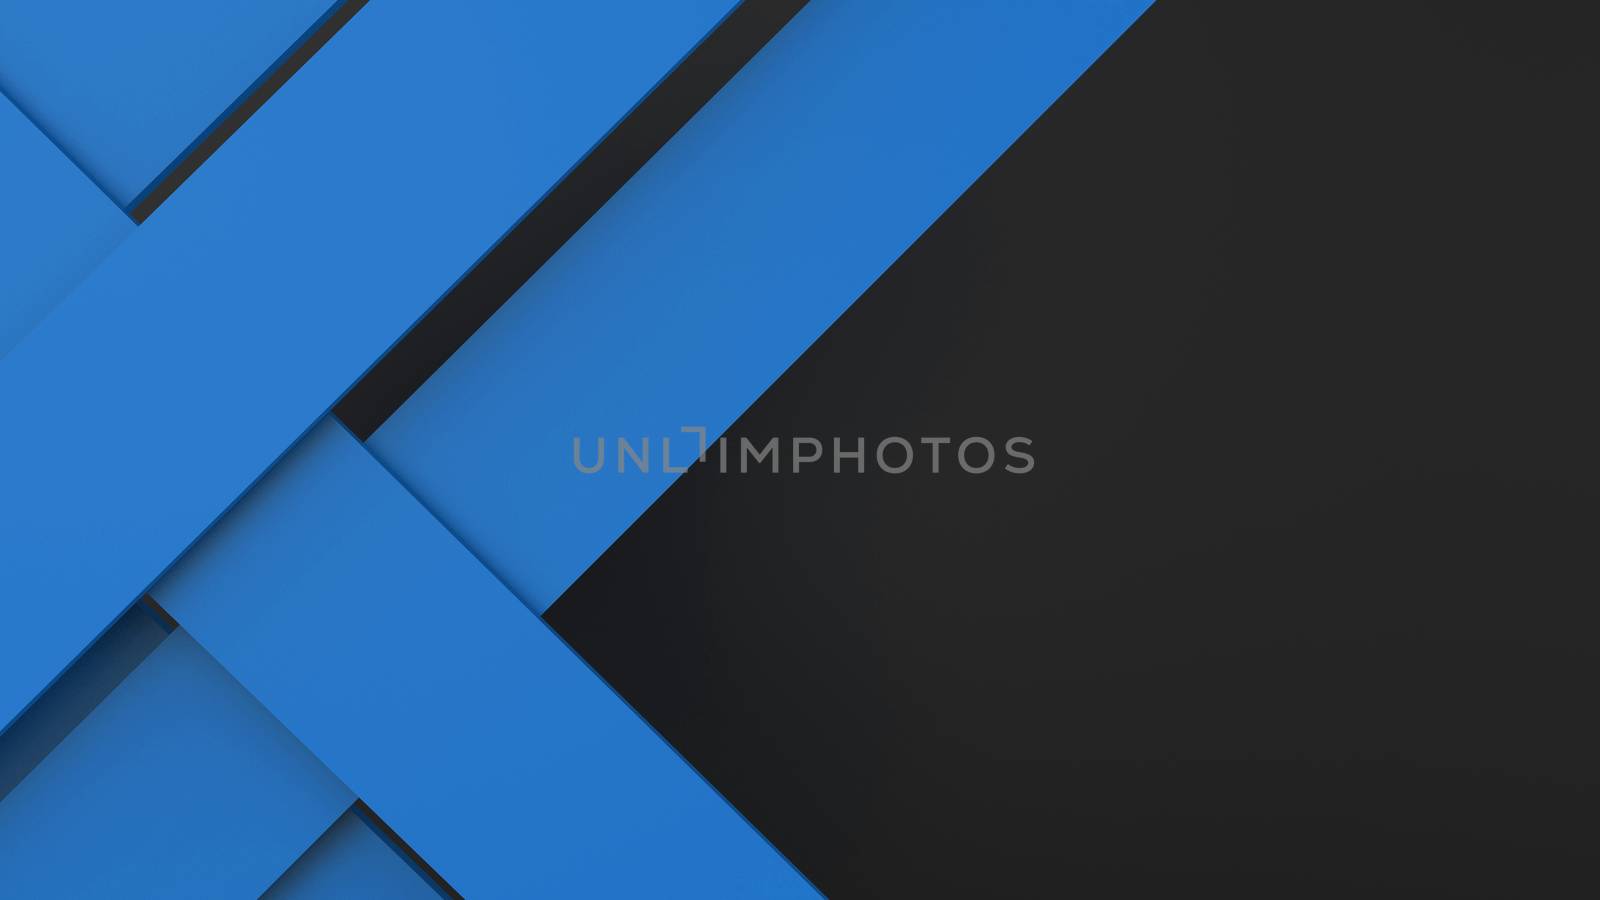 Diagonal blue dynamic stripes on black background. Modern abstract 3d render background with lines and dark shadows